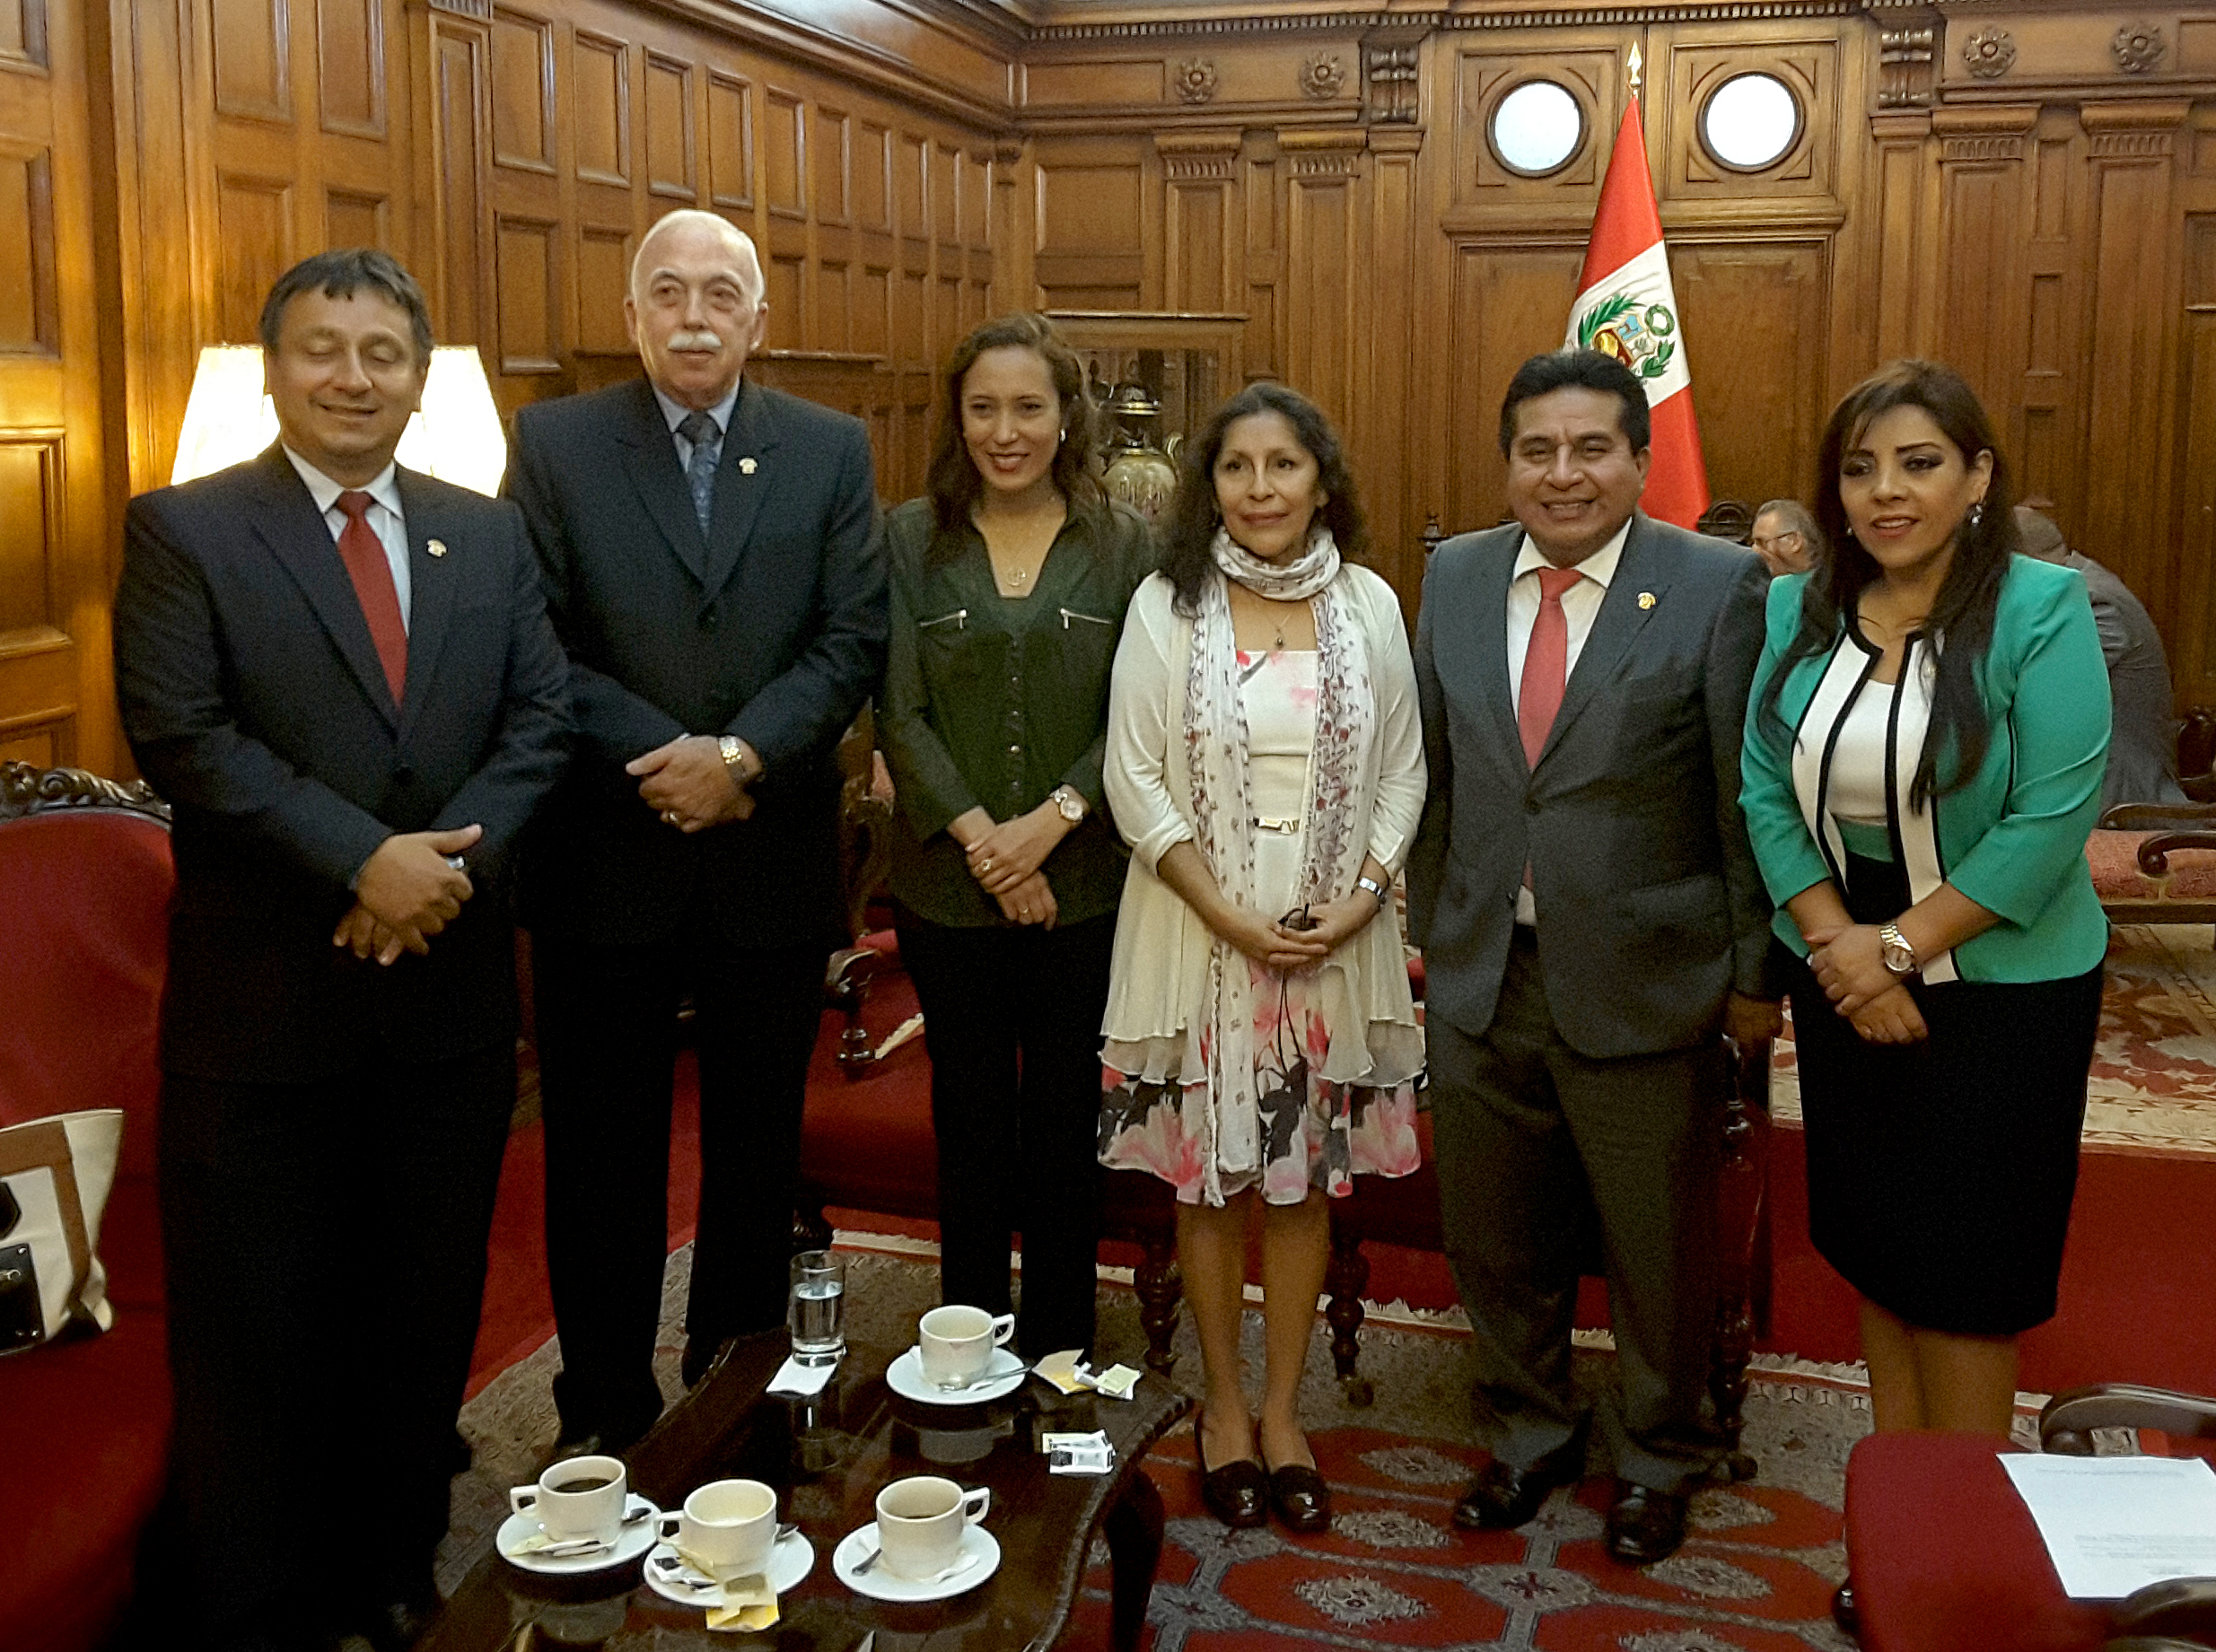 Senator Galvez meets with foreign dignitaries in the Congress of the Republic of Peru for the Asia-Pacific Economic Cooperation summit (APEC).